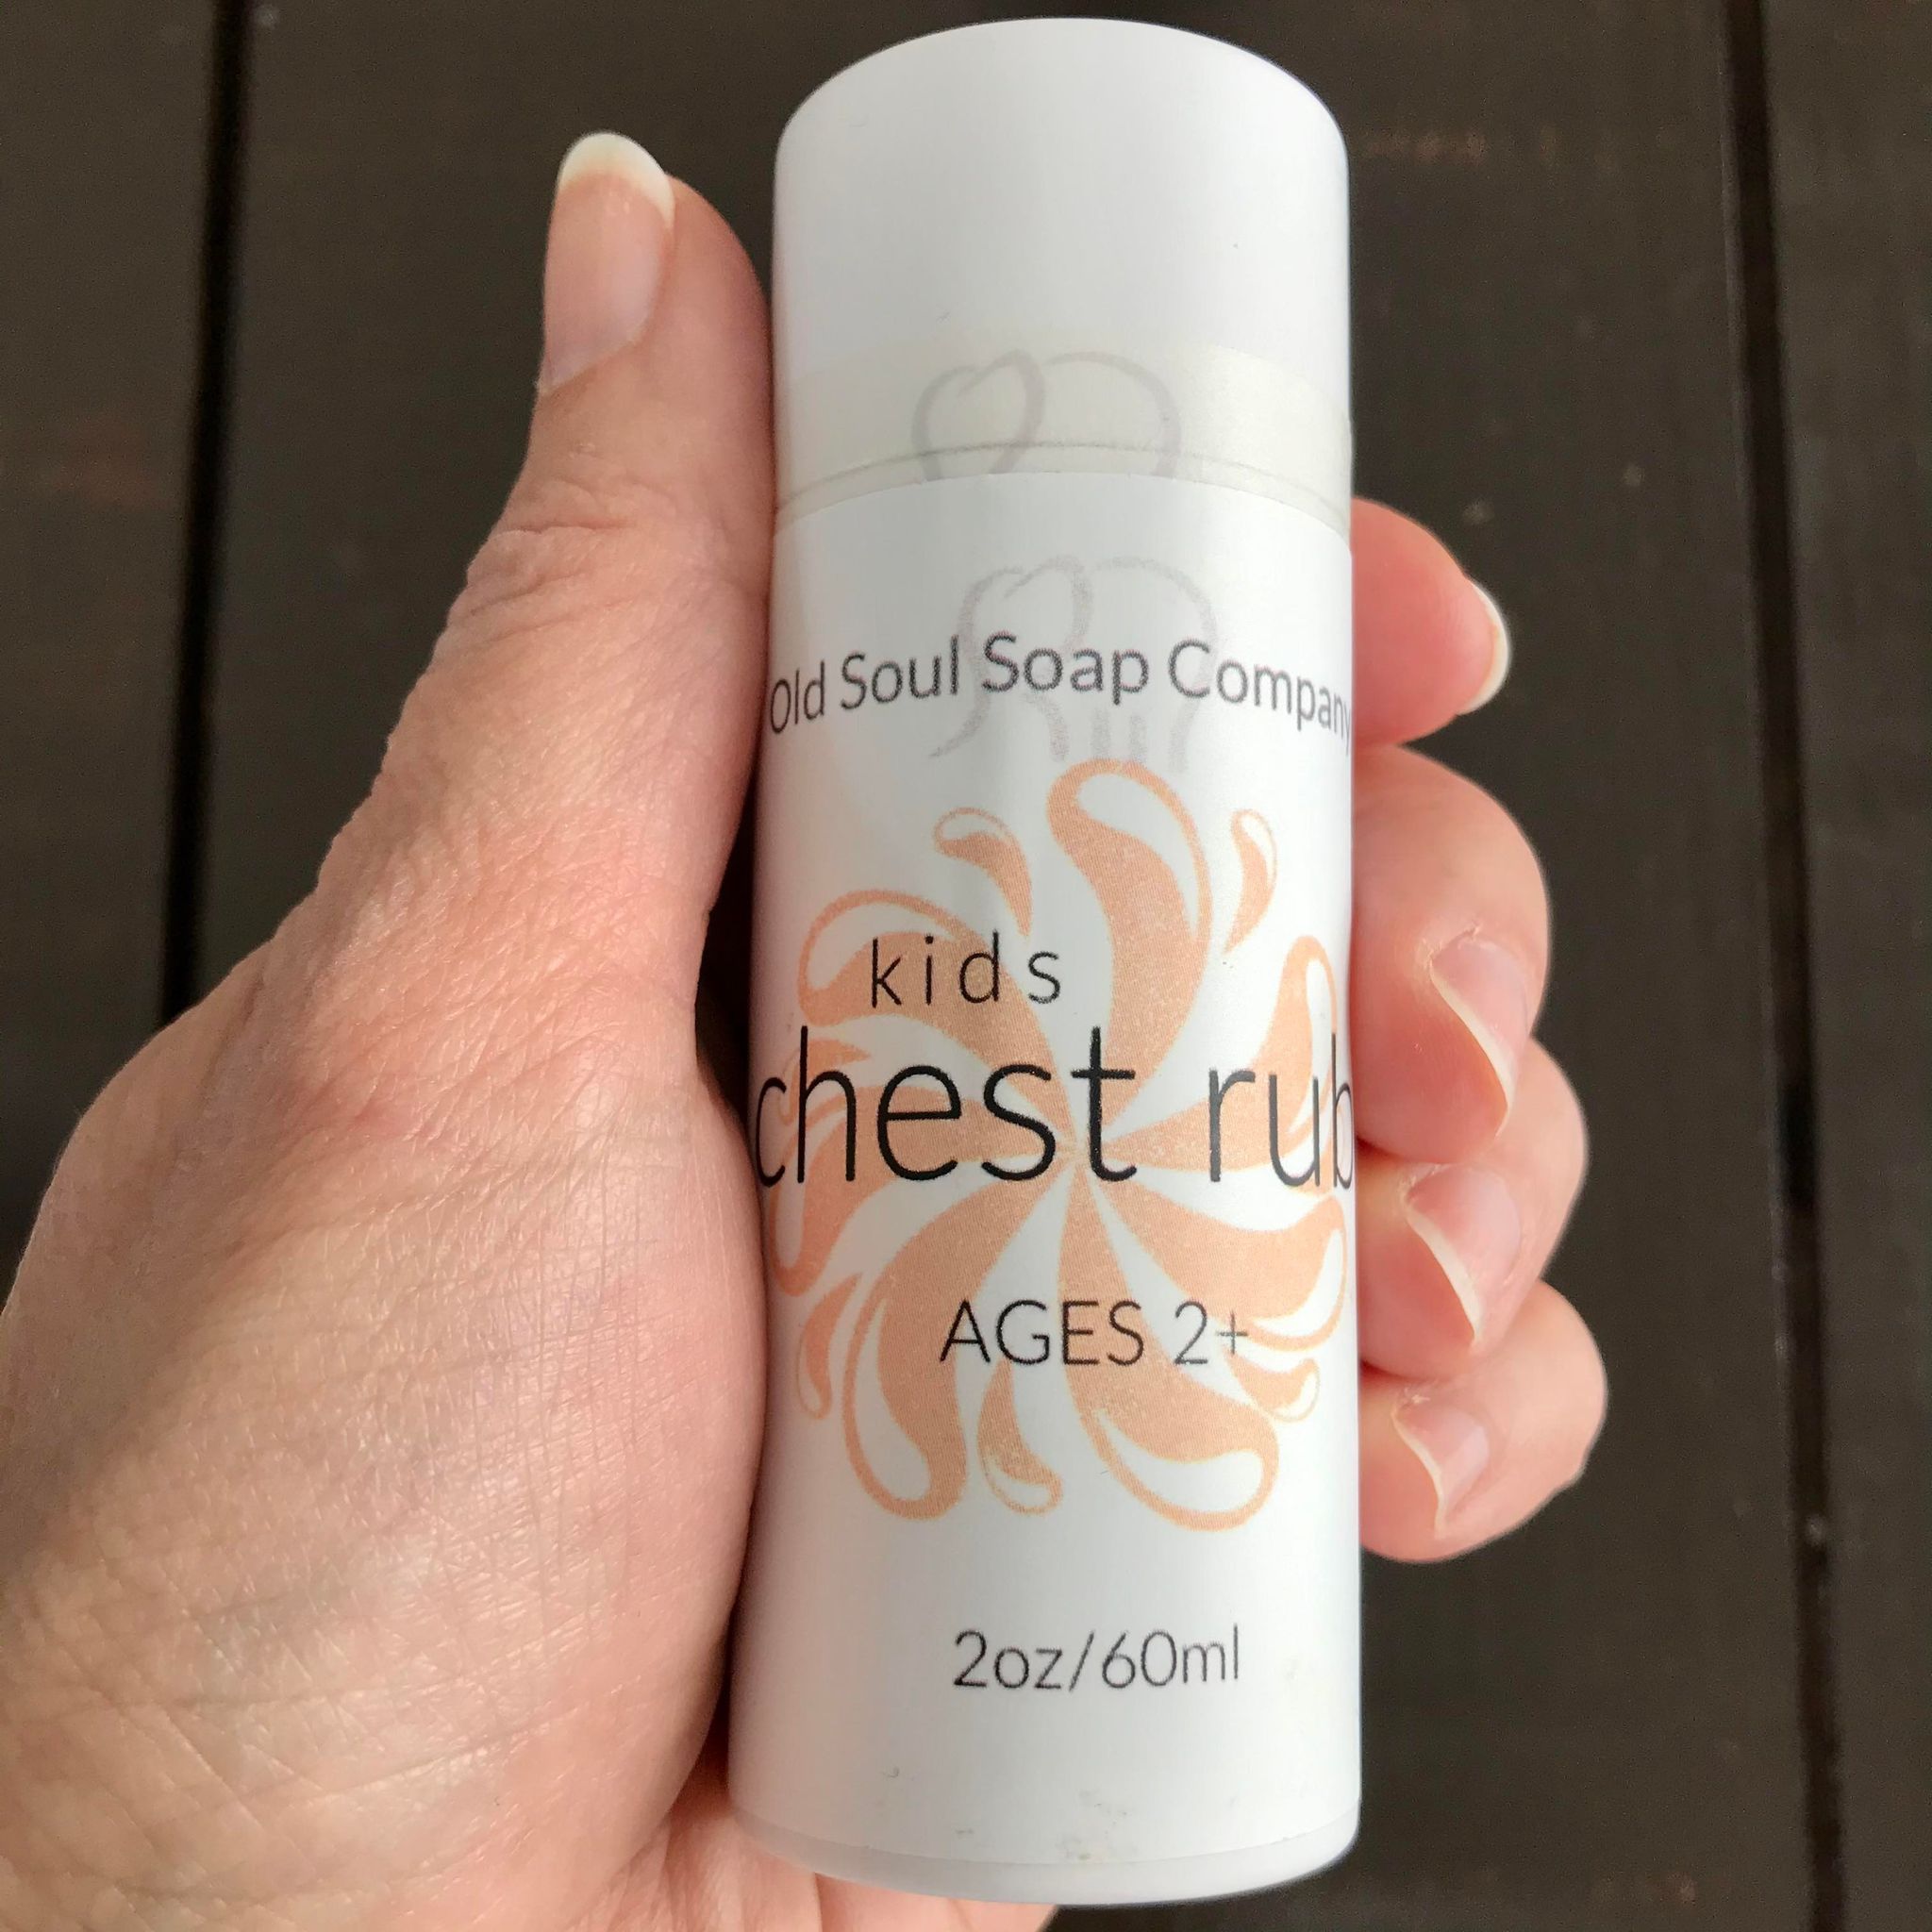 Natural chest rub balm 60 ml for kids comes in a compostable push up cardboard tube and is made in Canada by the Old Soul Soap Company